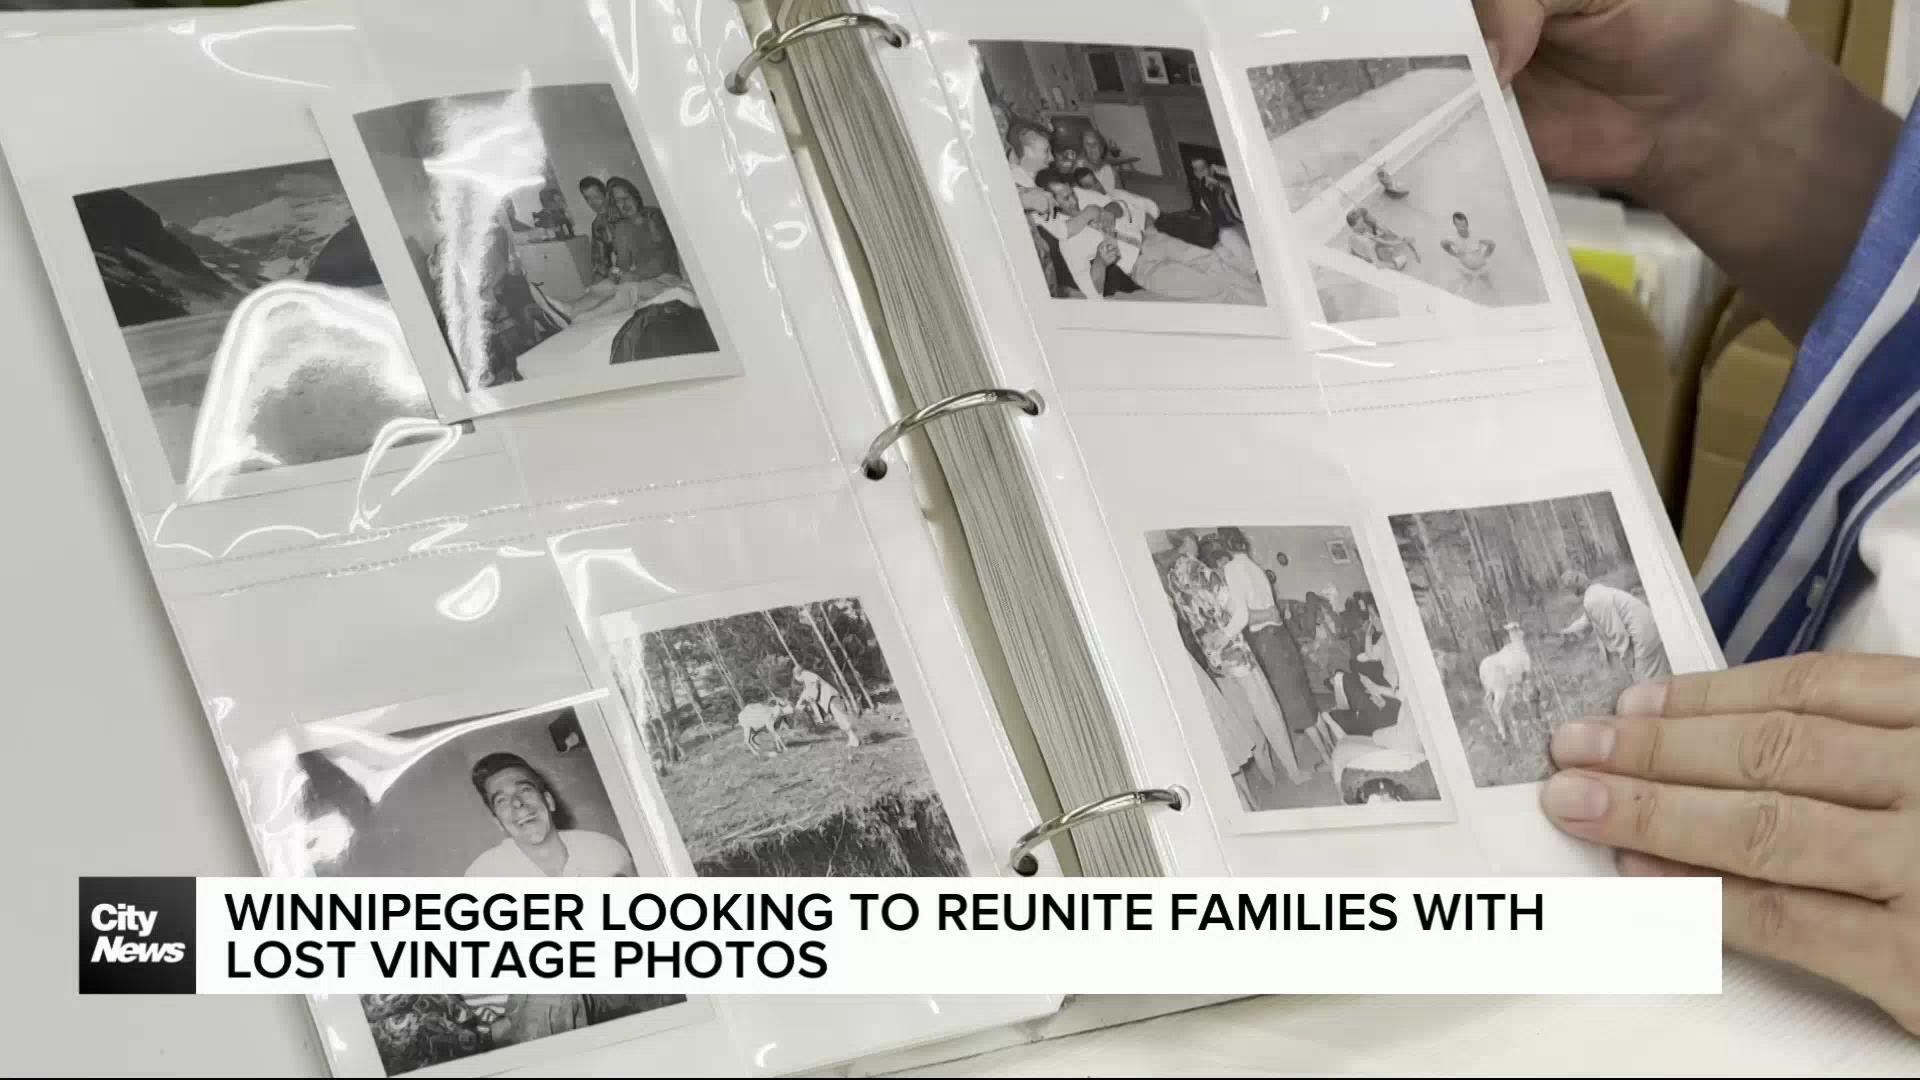 Winnipegger looking to reunite families with long-lost photos